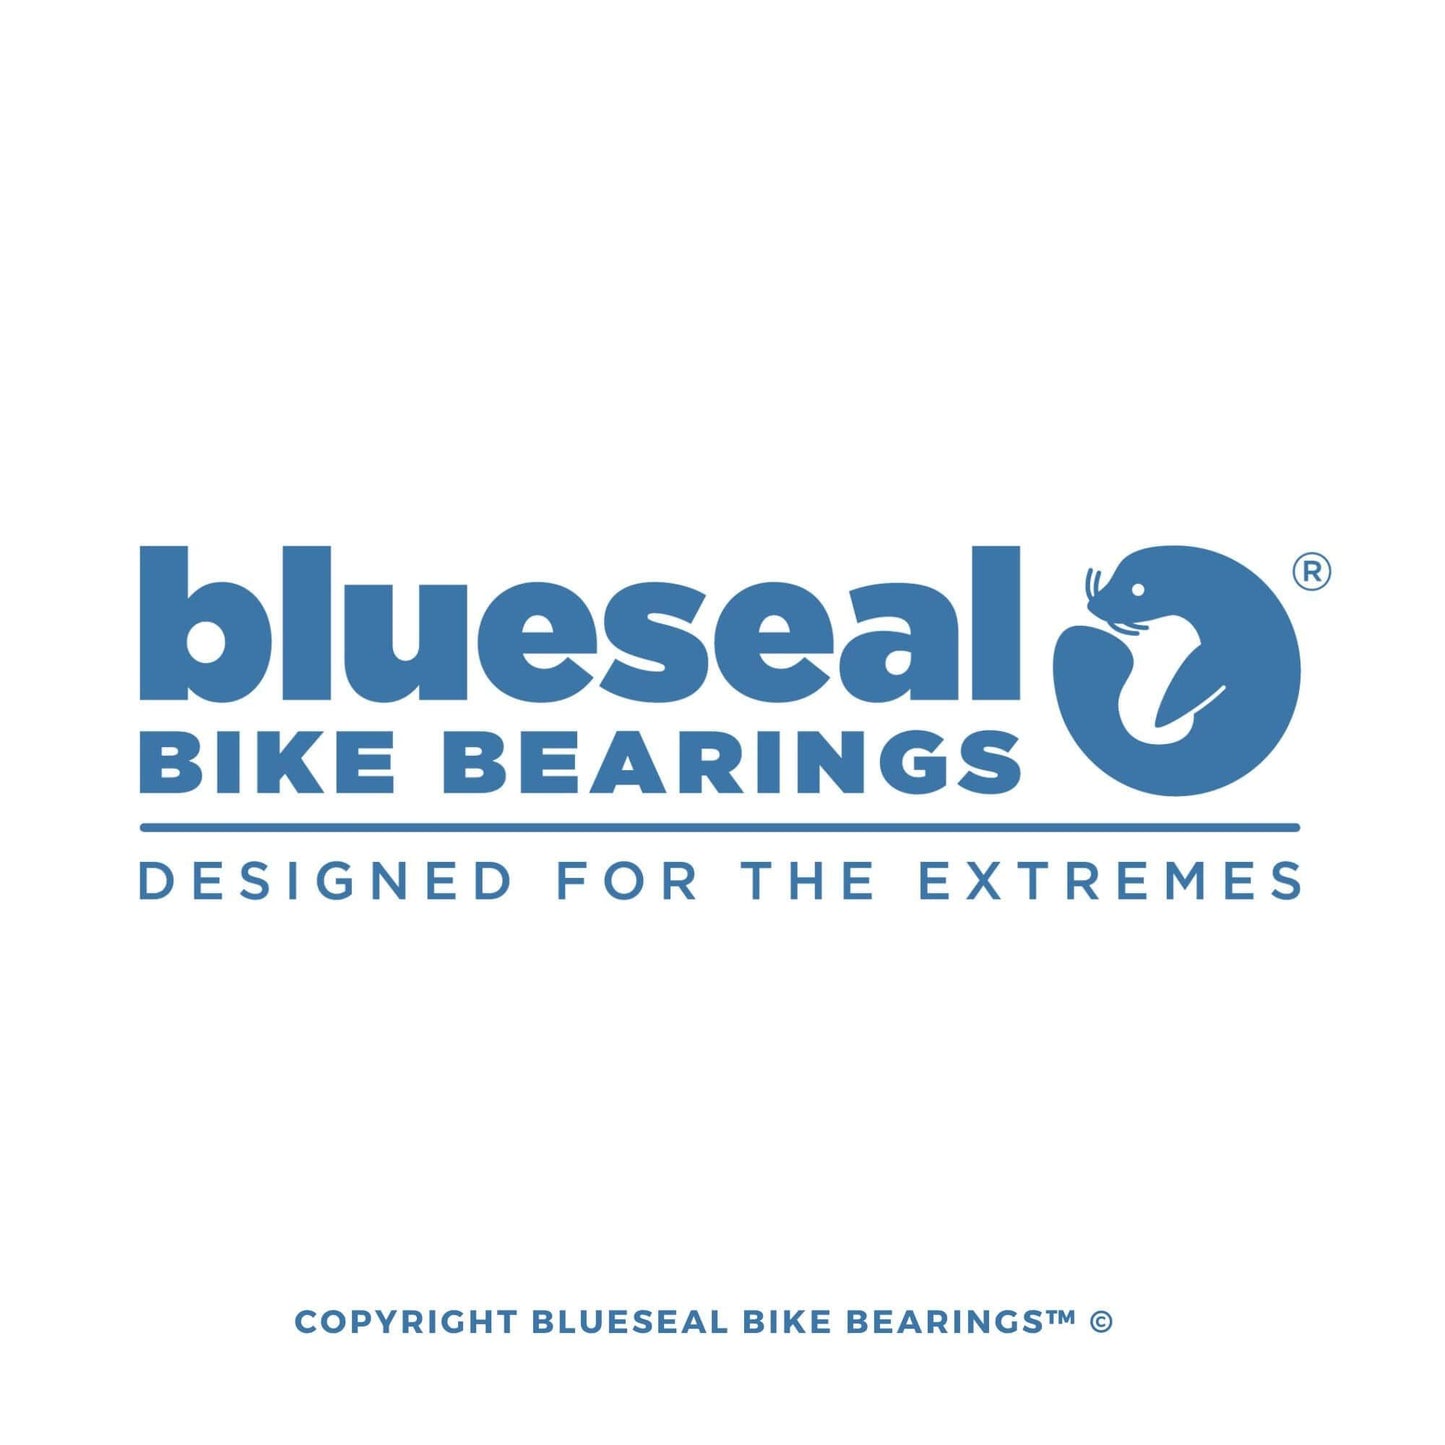 Enduro Headset Bearings - Specialized - Trailvision - Bicycle Bearing Suppliers